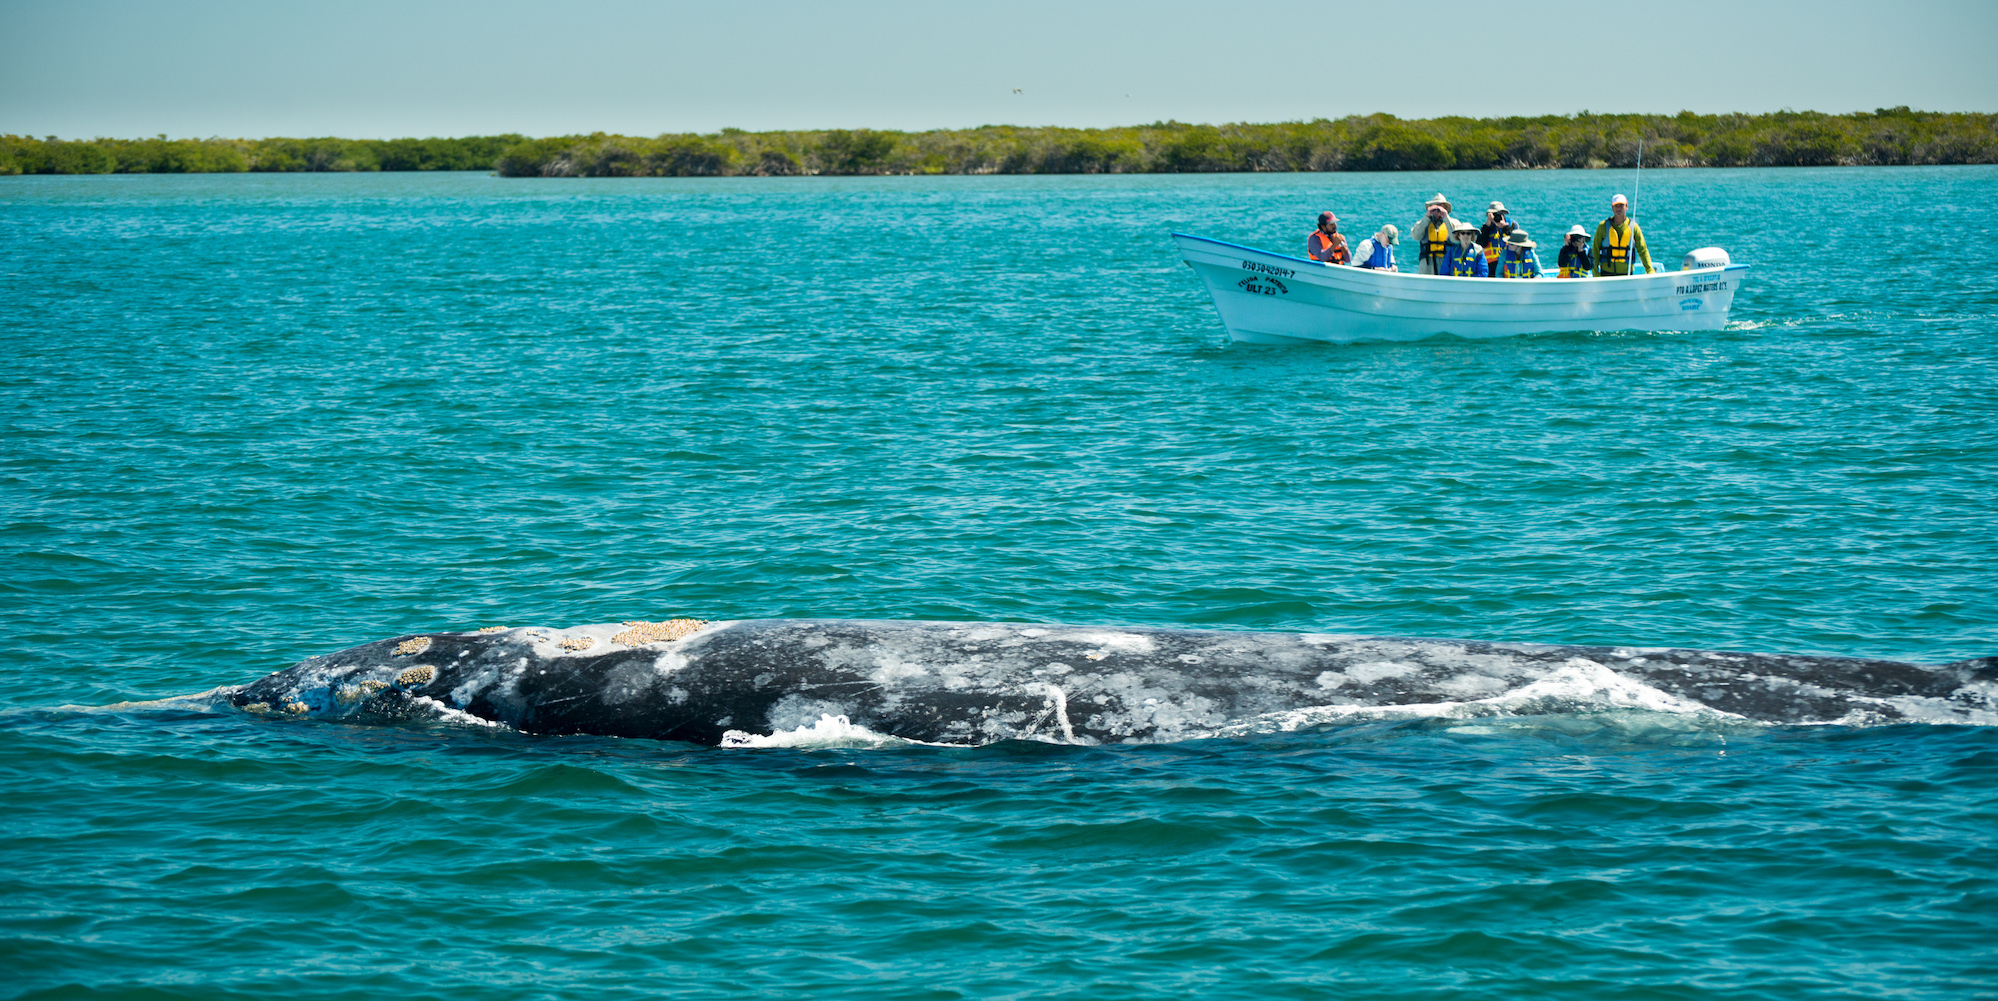 A boat of whale watchers observing a whale in the water near them in Baja California Sur